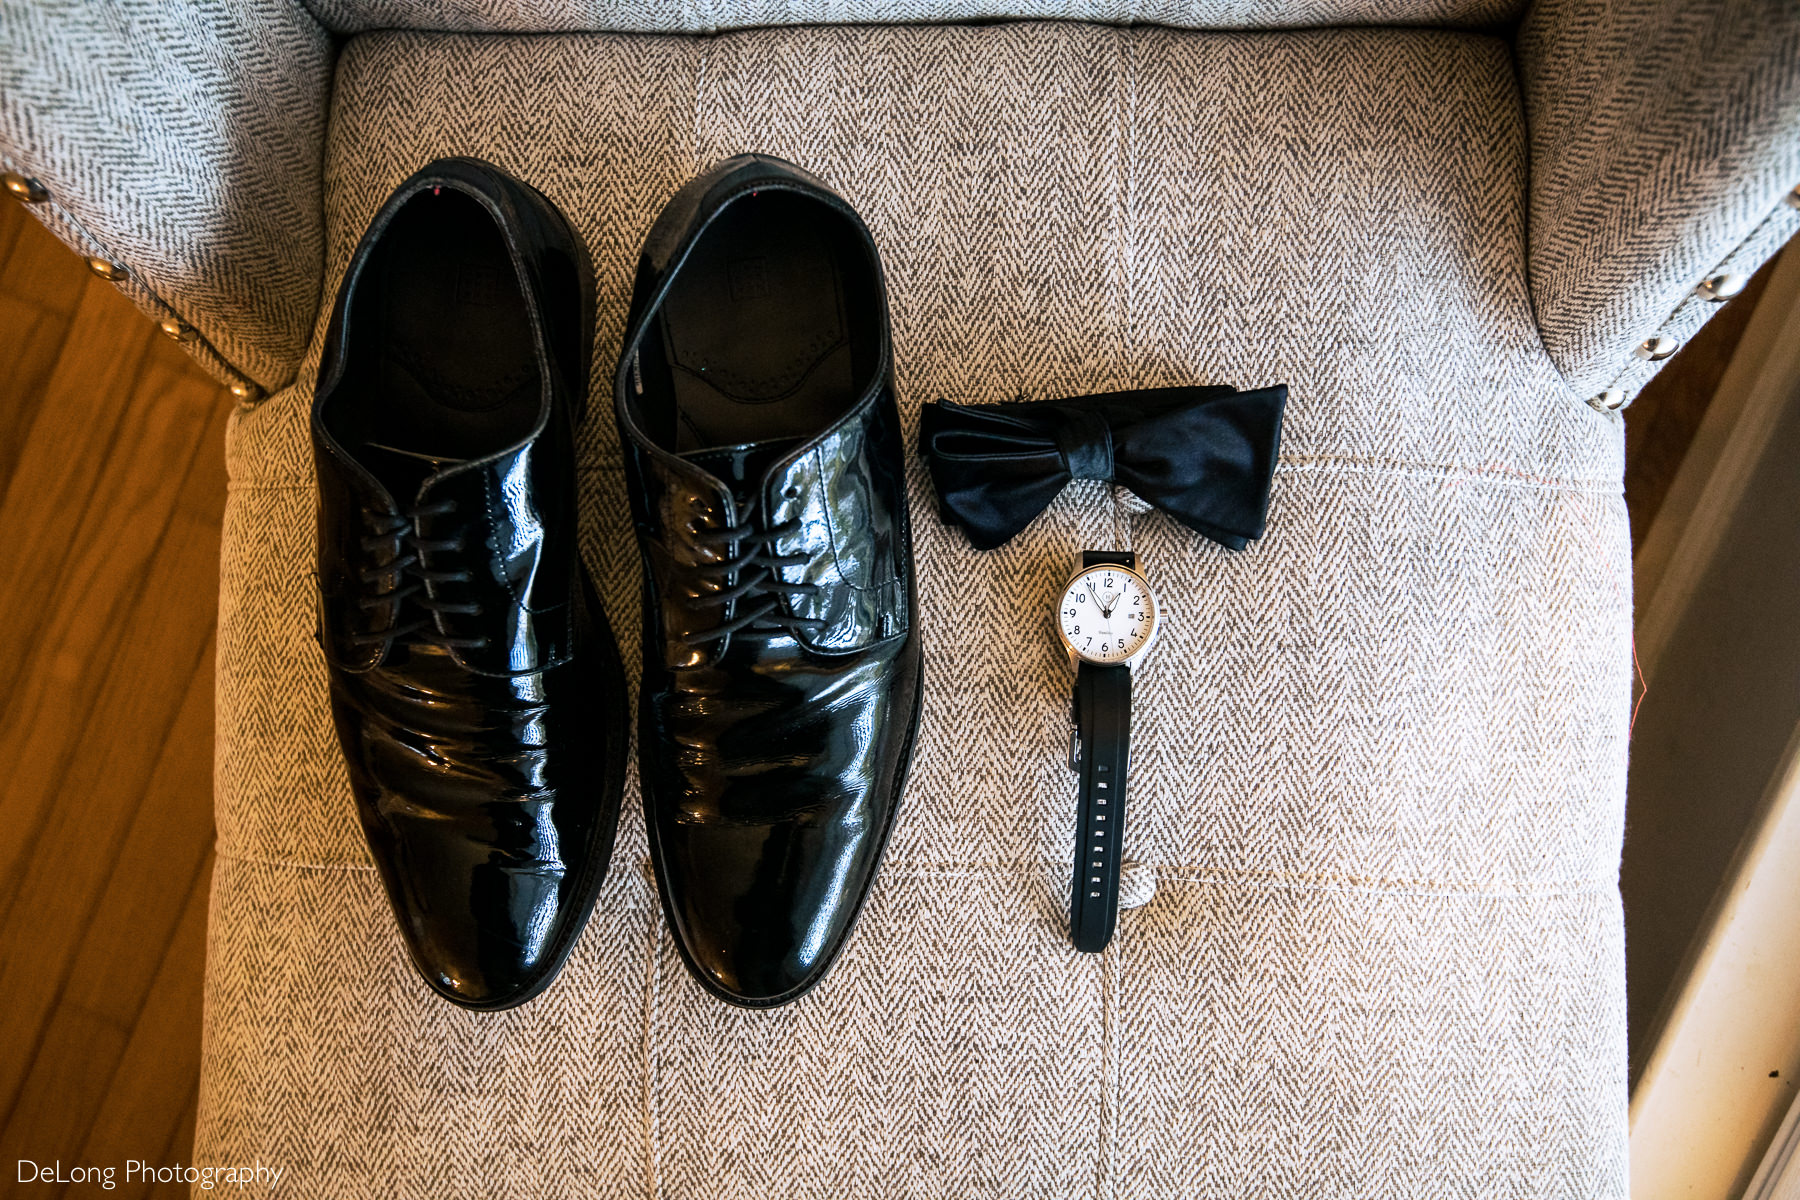 Groom's polished black shoes, black tie, and black watch on a grey side chair displaying his wedding details by Charlotte wedding photographers DeLong Photography